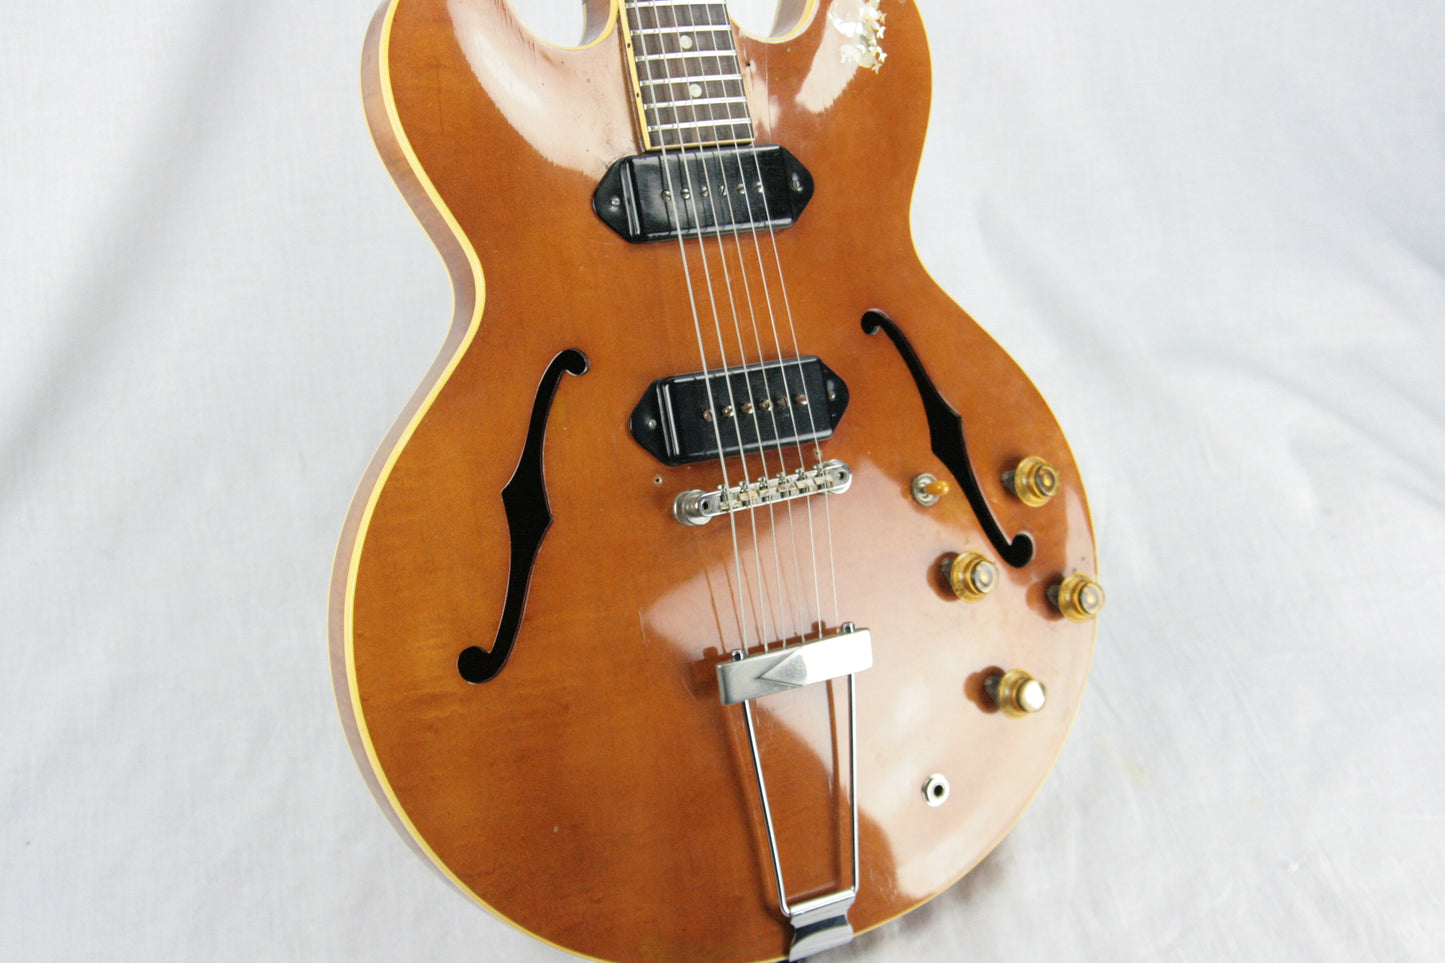 1959 Gibson ES-330 TD Thinline Electric Guitar Player-Grade! 2 P90's Sound Great! 225 335